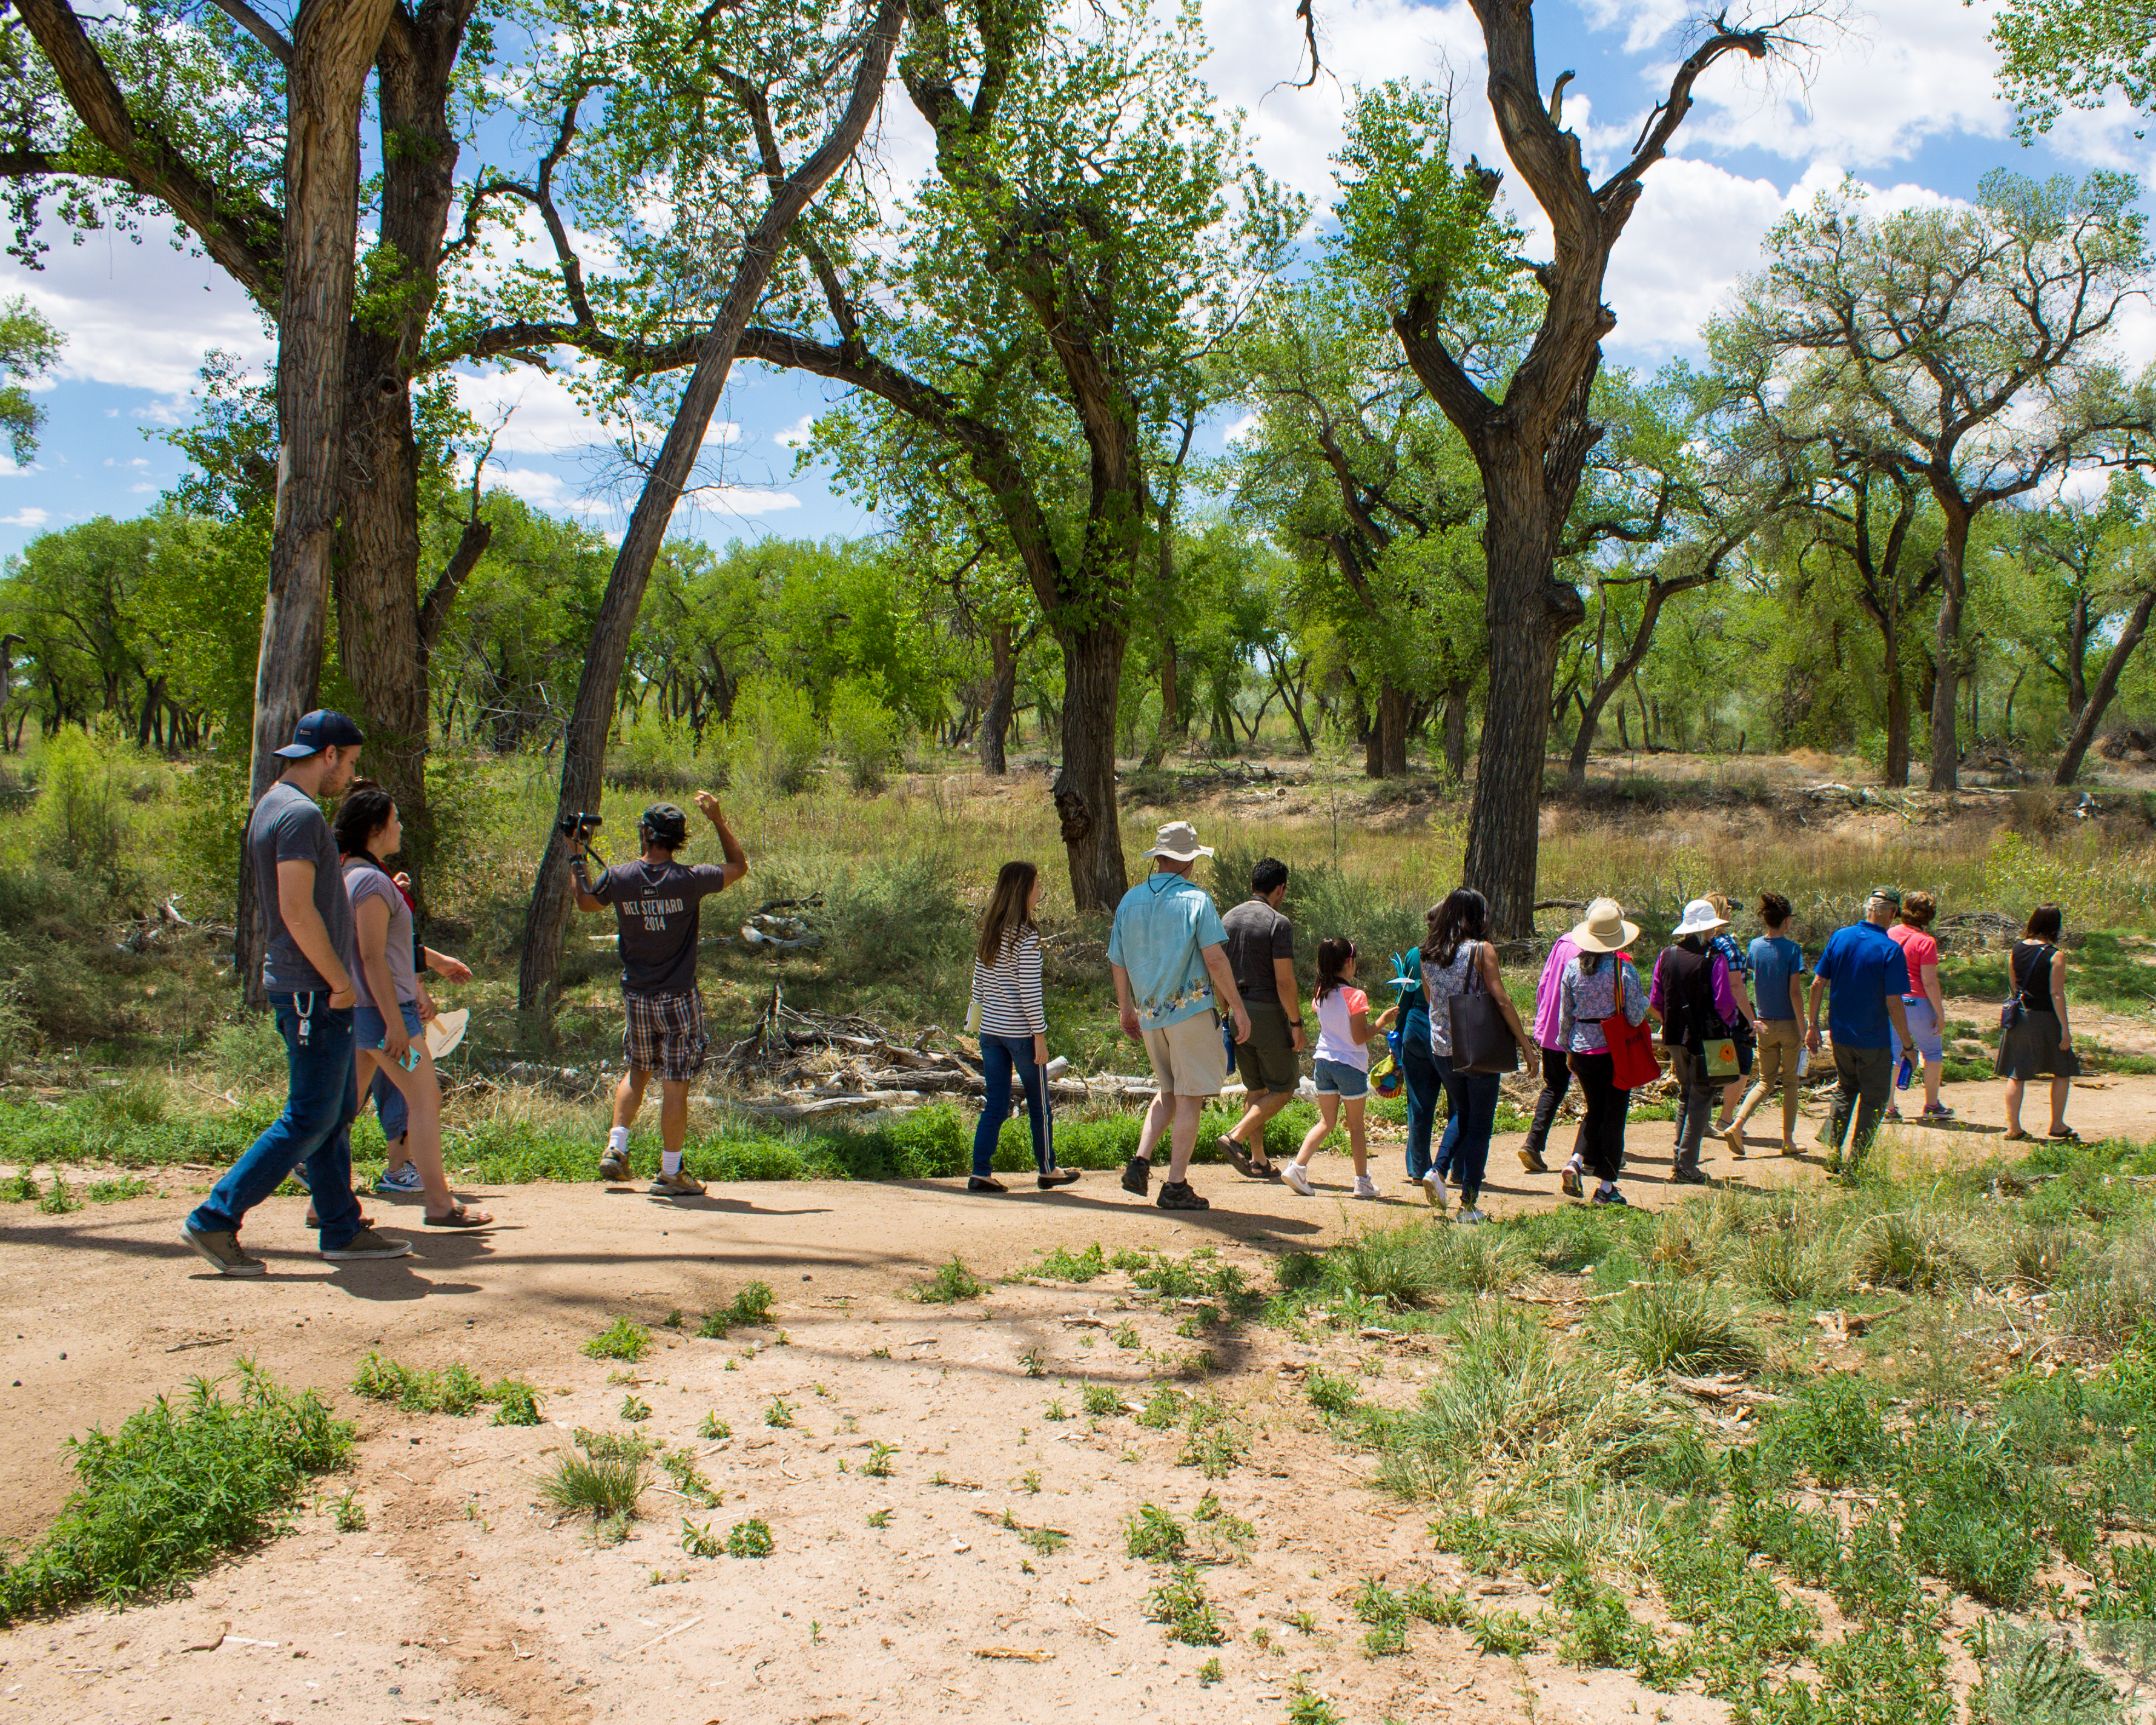 A group of school-age kids walking along a path in a dry environment